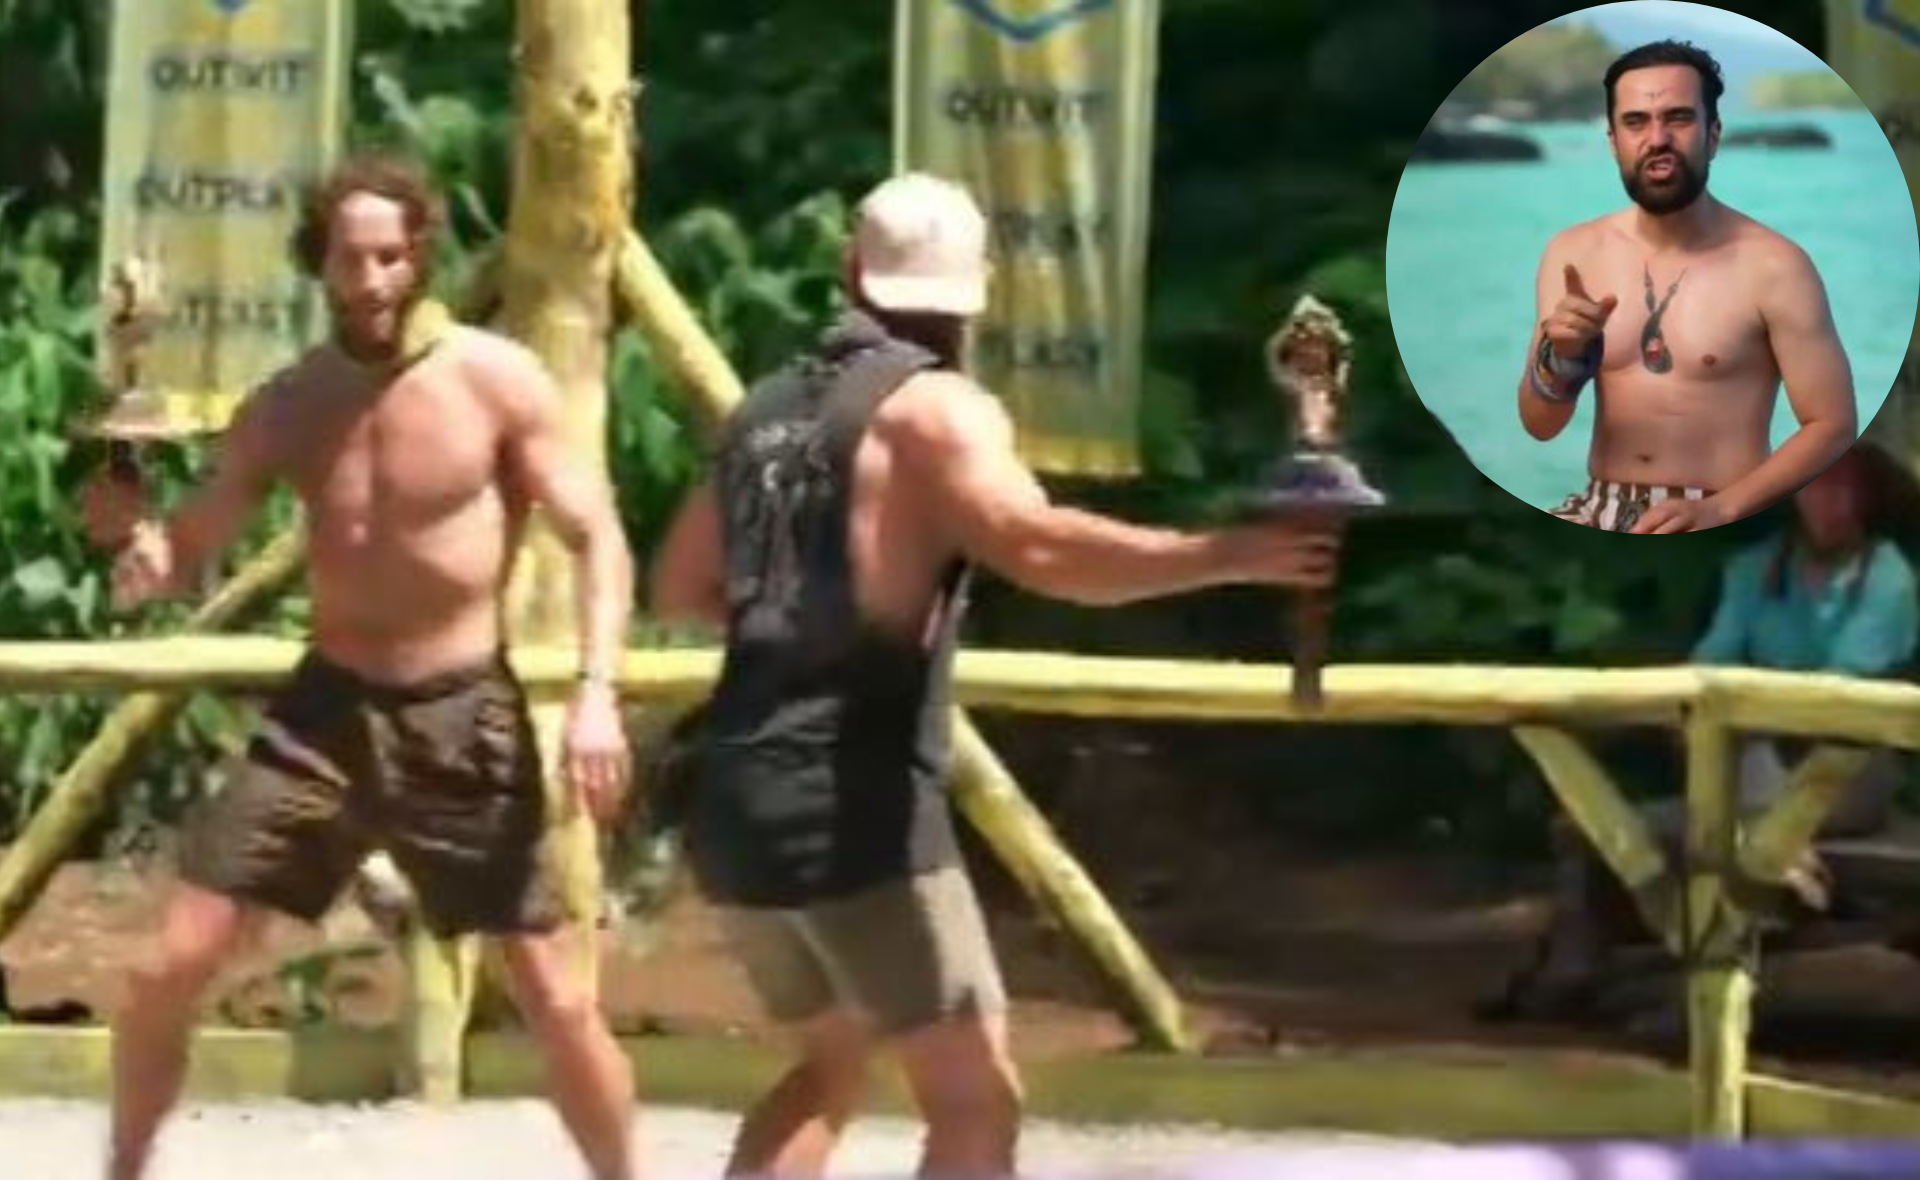 Survivor Ep 6 Recap: George pushes player into the flames of tribal council